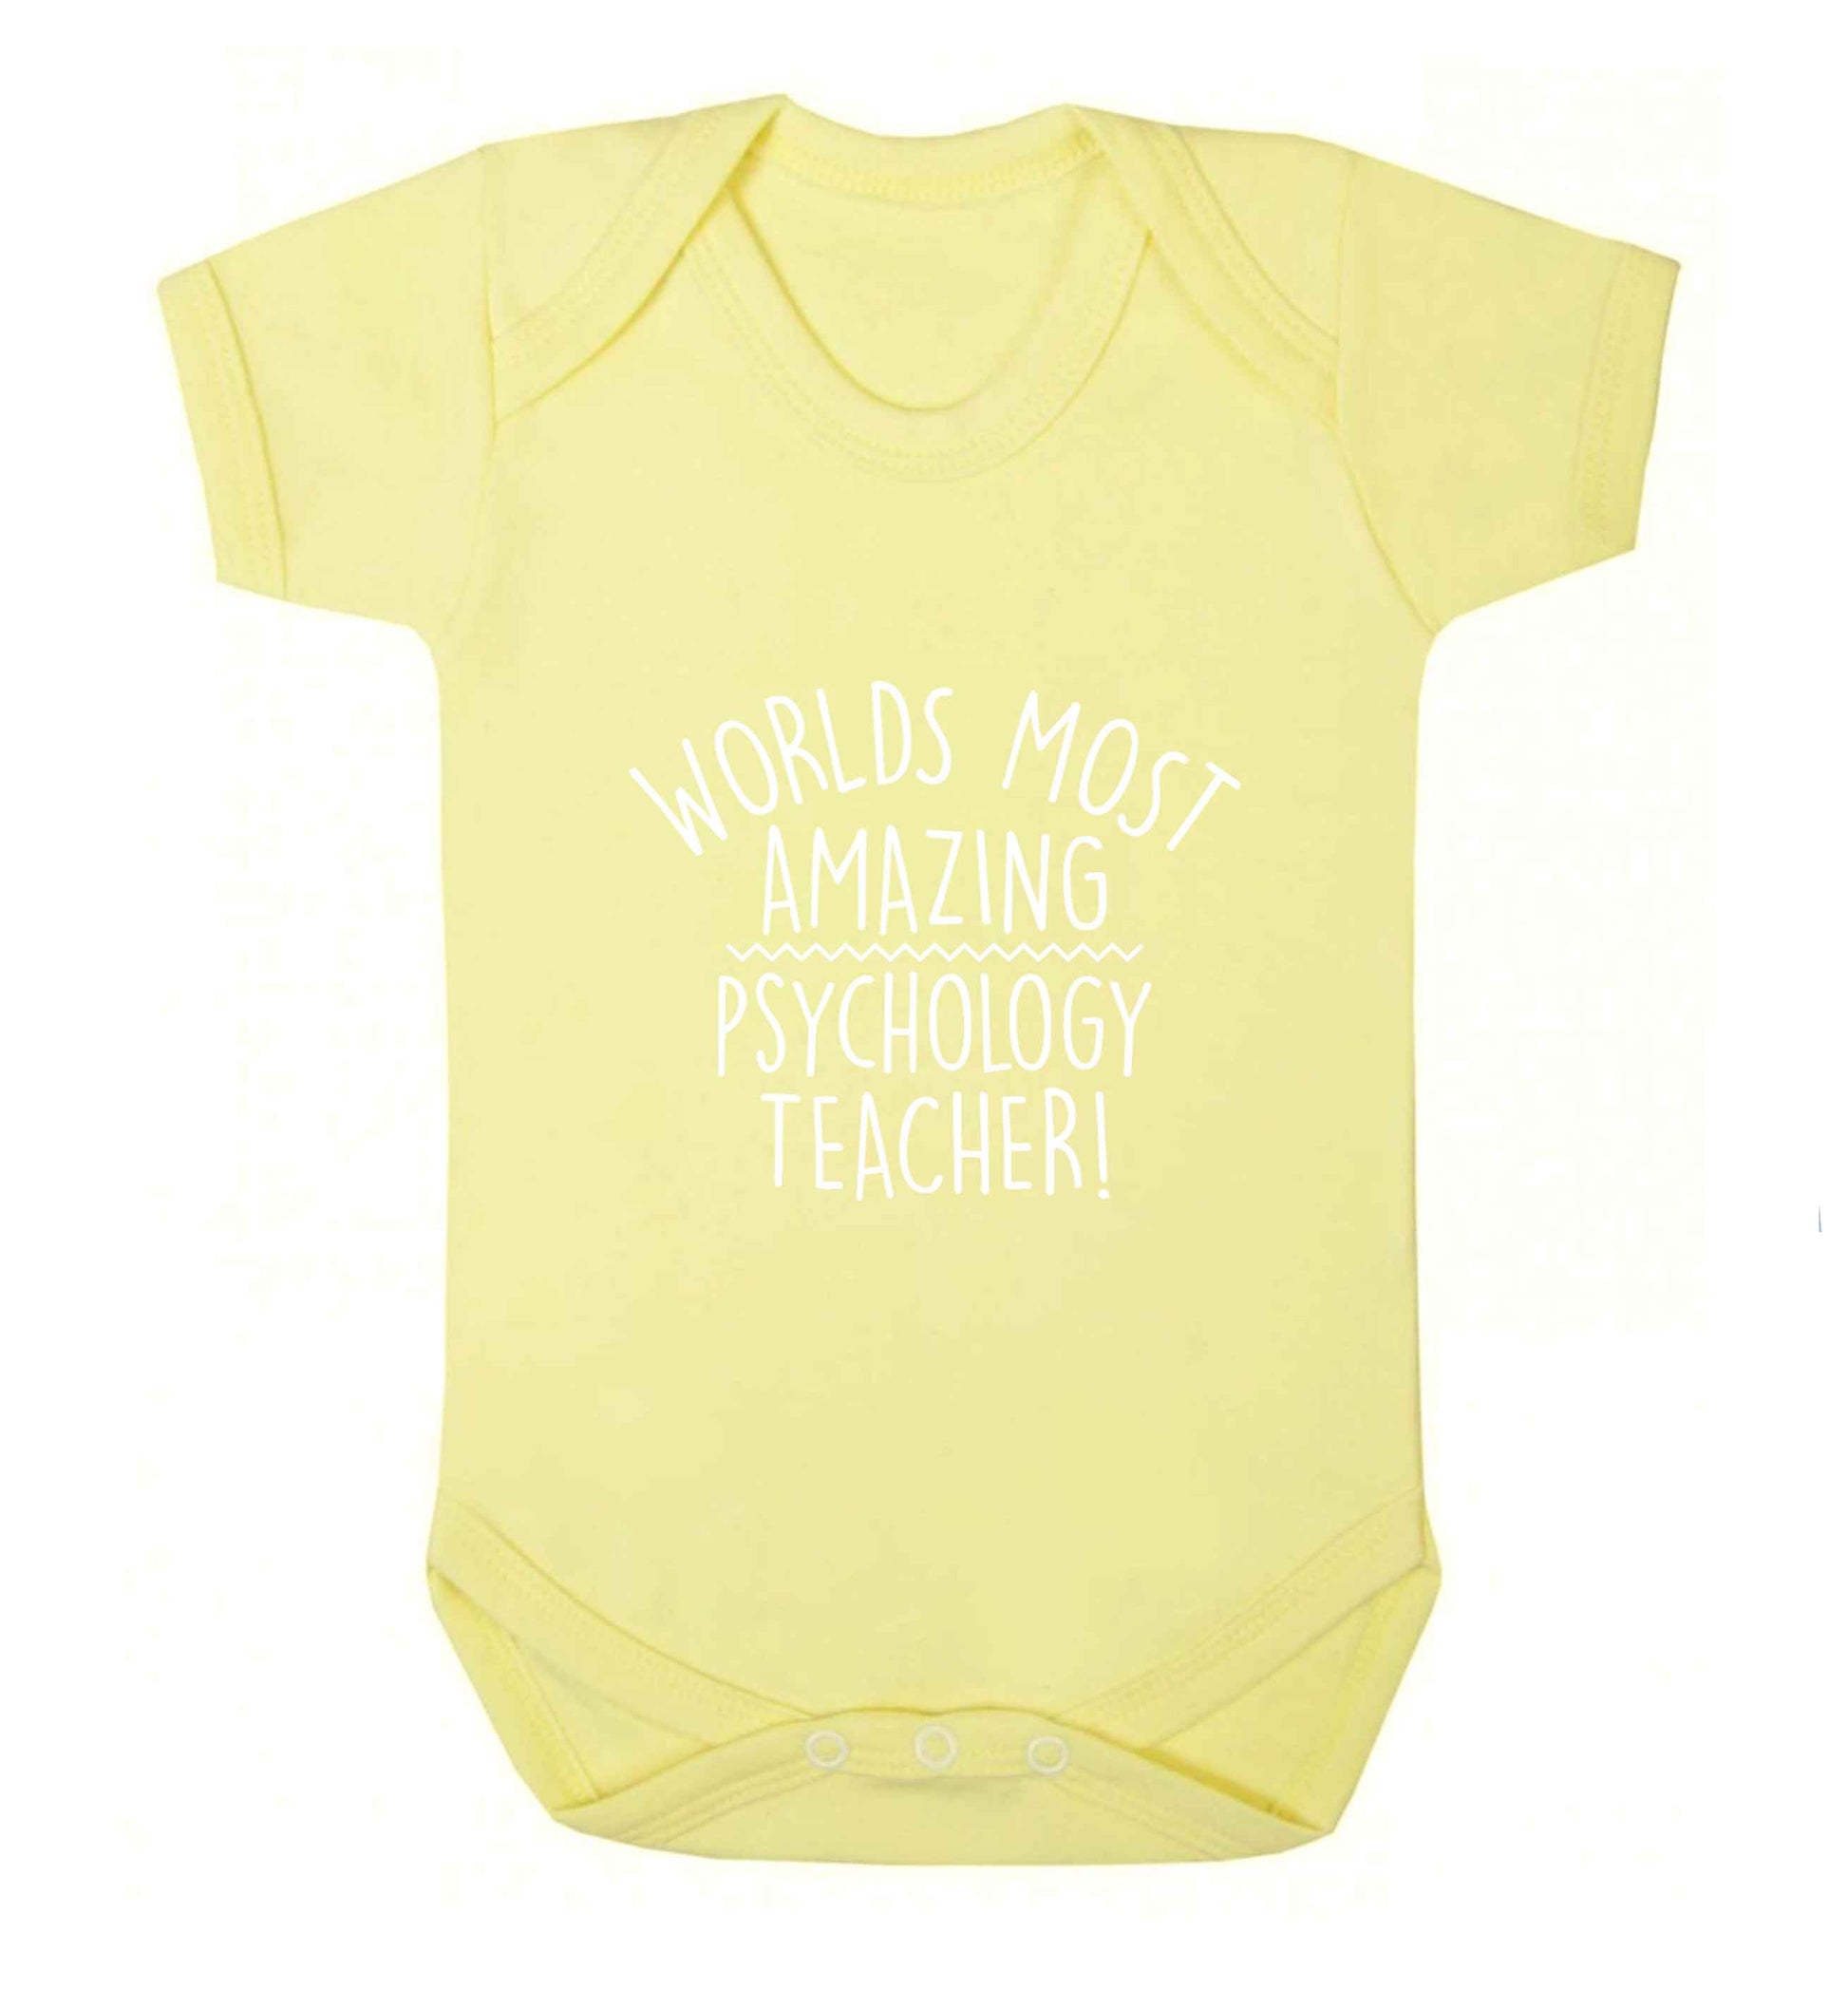 Worlds most amazing psychology teacher baby vest pale yellow 18-24 months